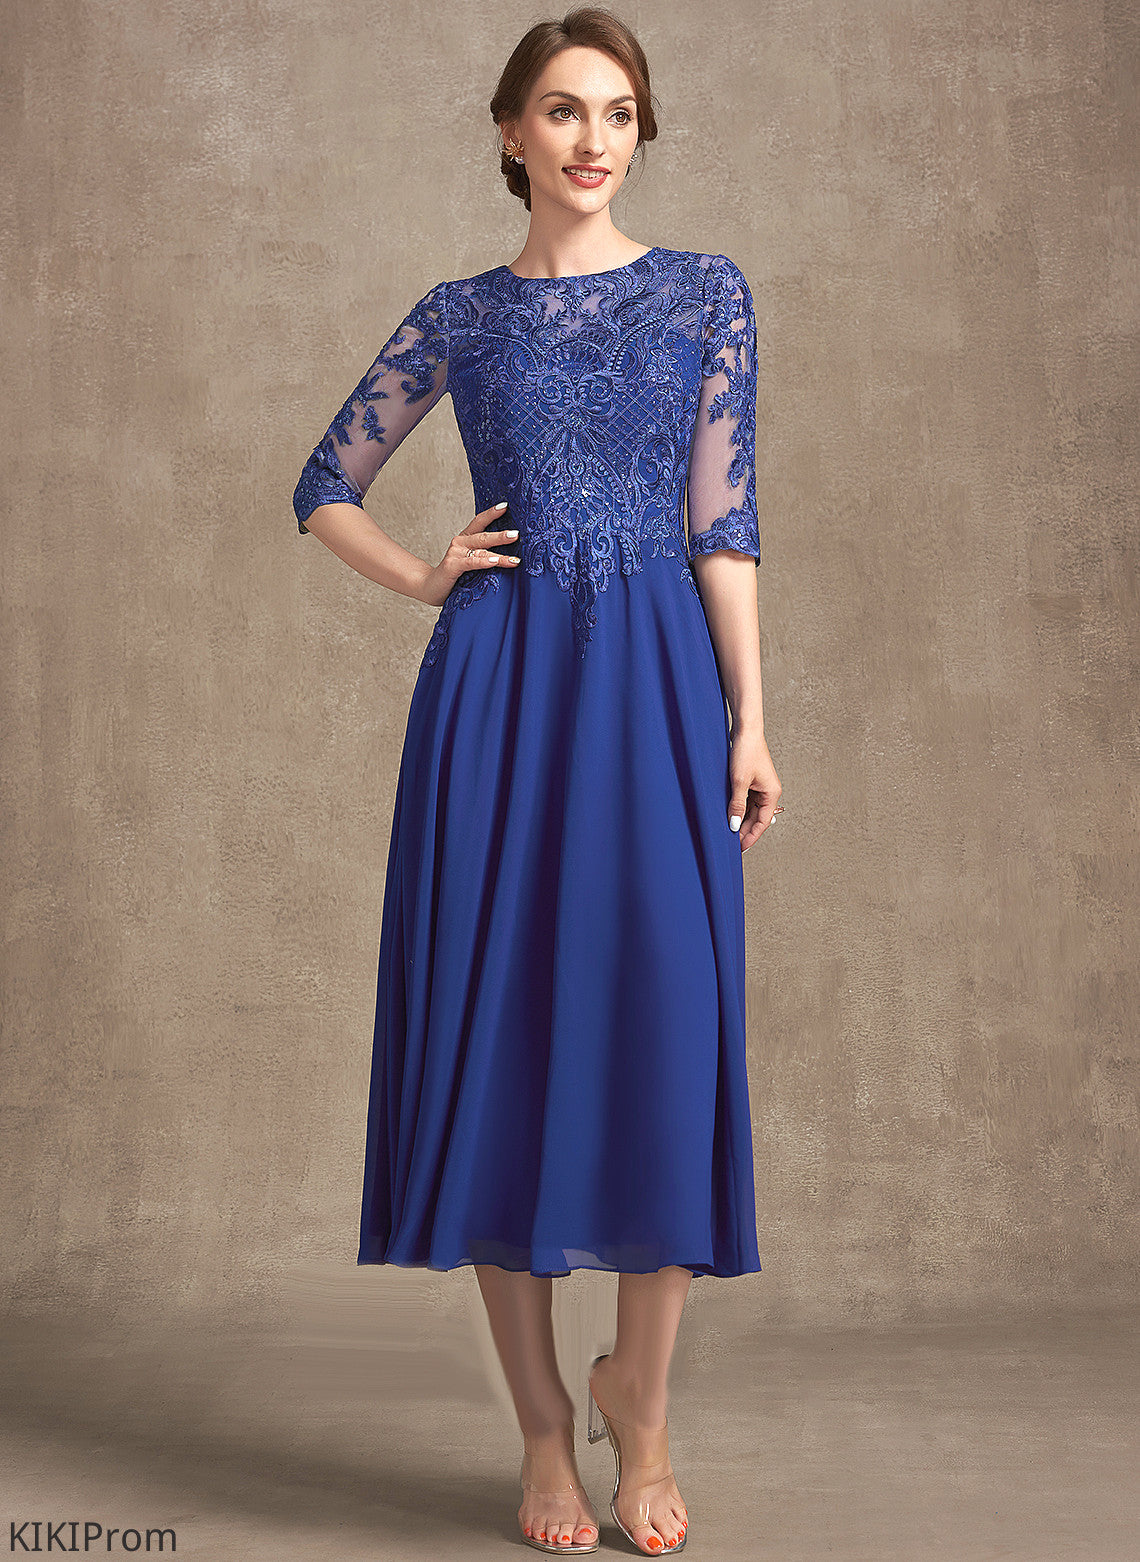 of Mother of the Bride Dresses Dress Mother Tea-Length the Neck Lace With Leyla A-Line Chiffon Bride Sequins Scoop